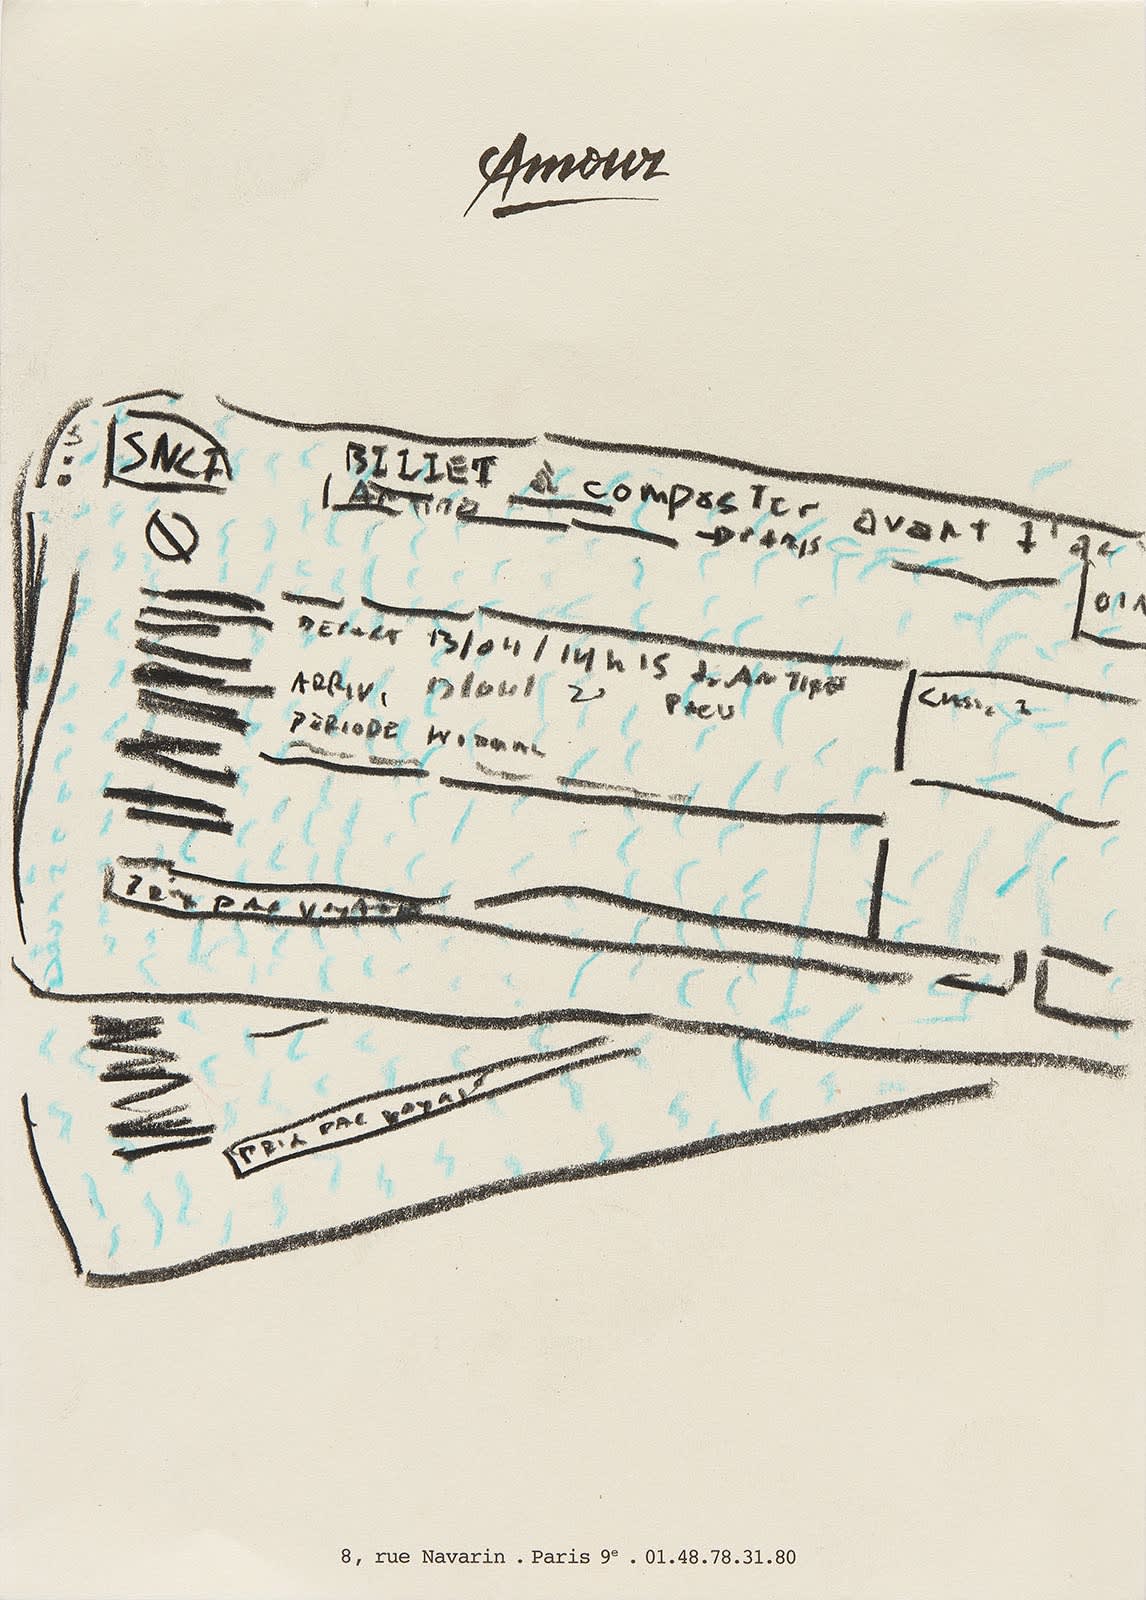 A pencil crayon drawing by Michael McGregor of tickets to a show drawn on hotel stationary. 